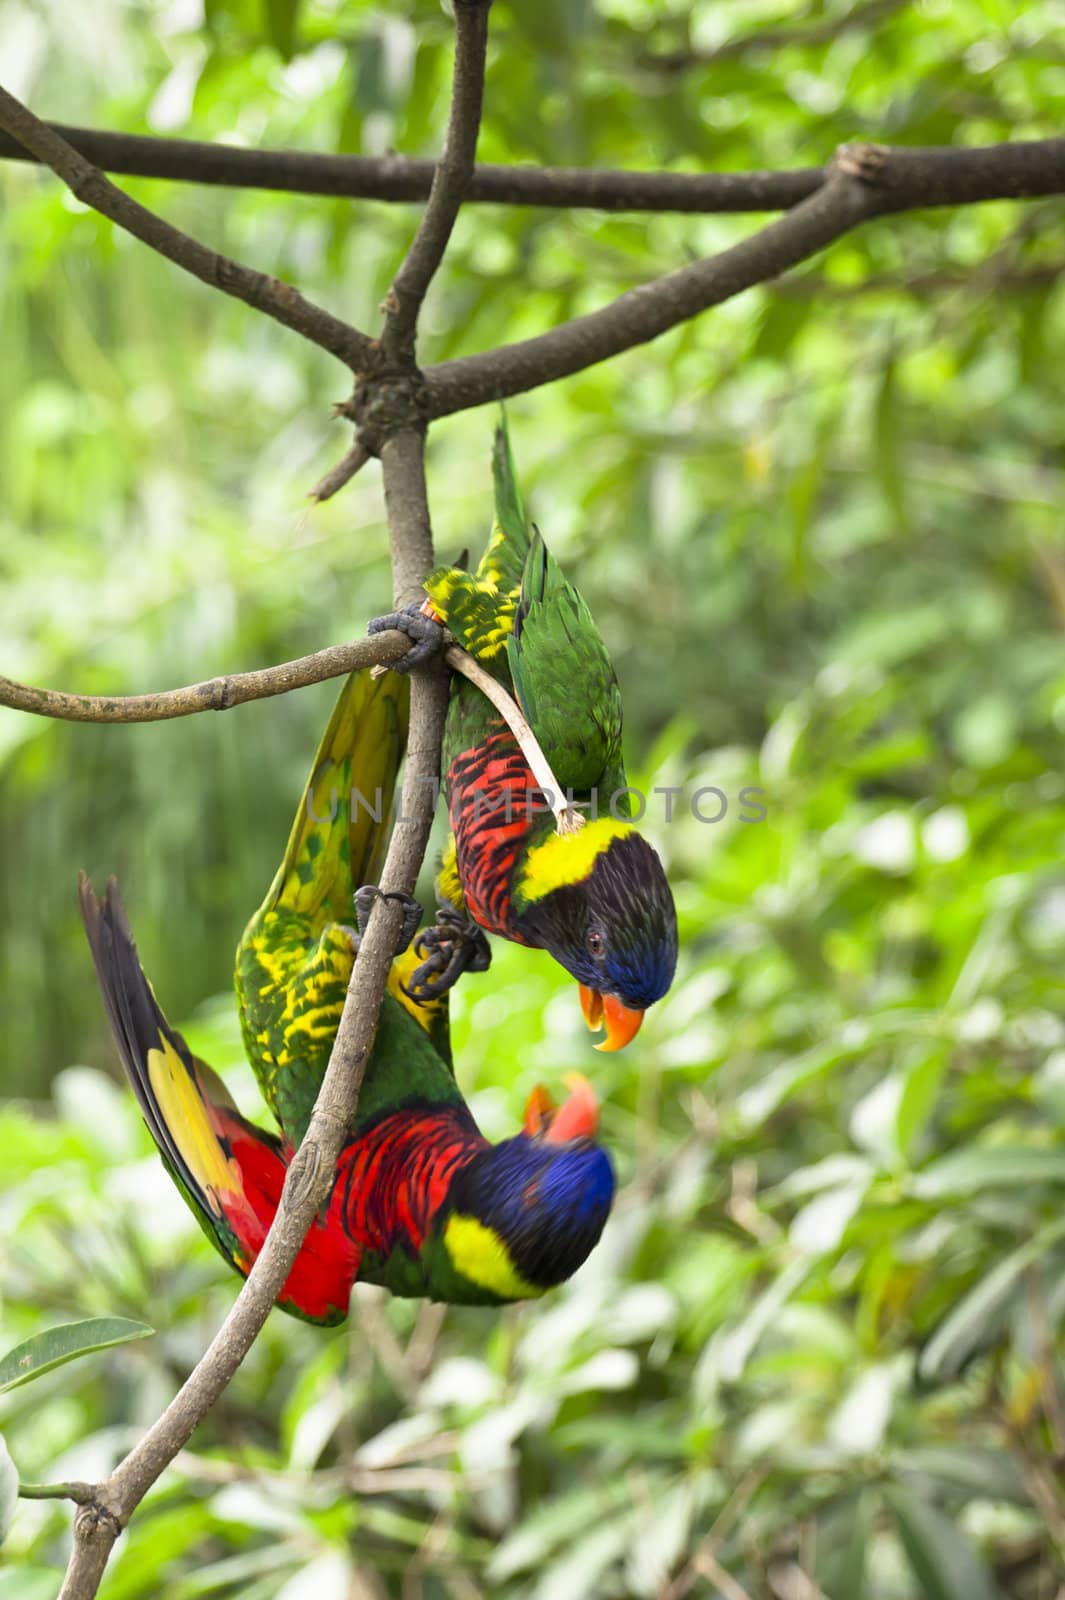 Parrot- a pair of Rainbow Lory playing while holding on a tree branch